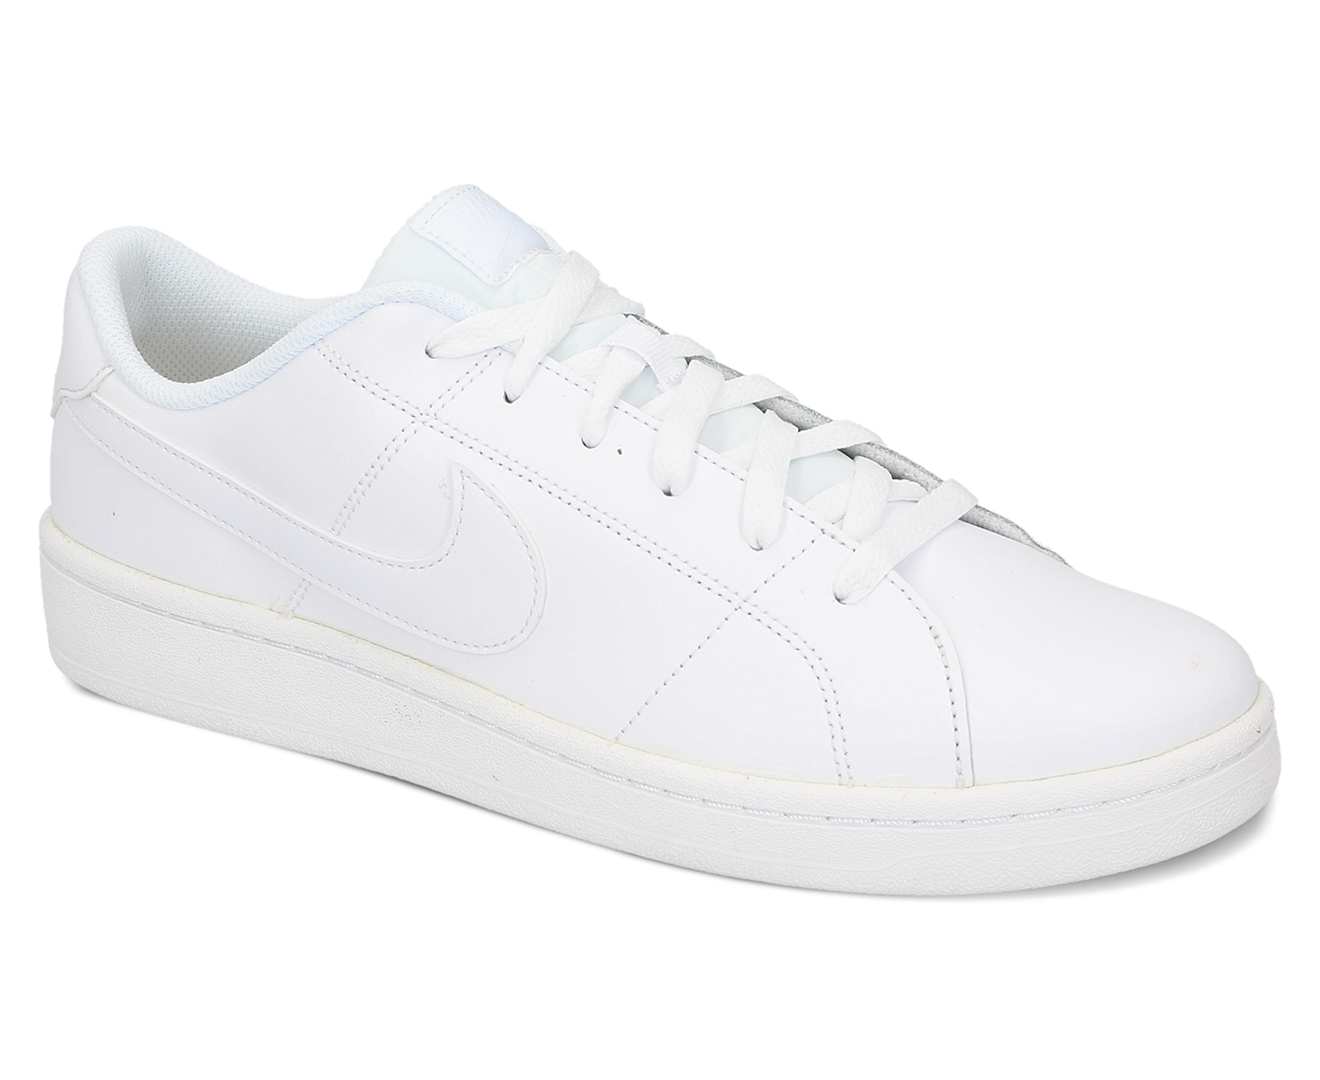 Nike Men #39 s Court Royale 2 Sneakers White Catch co nz